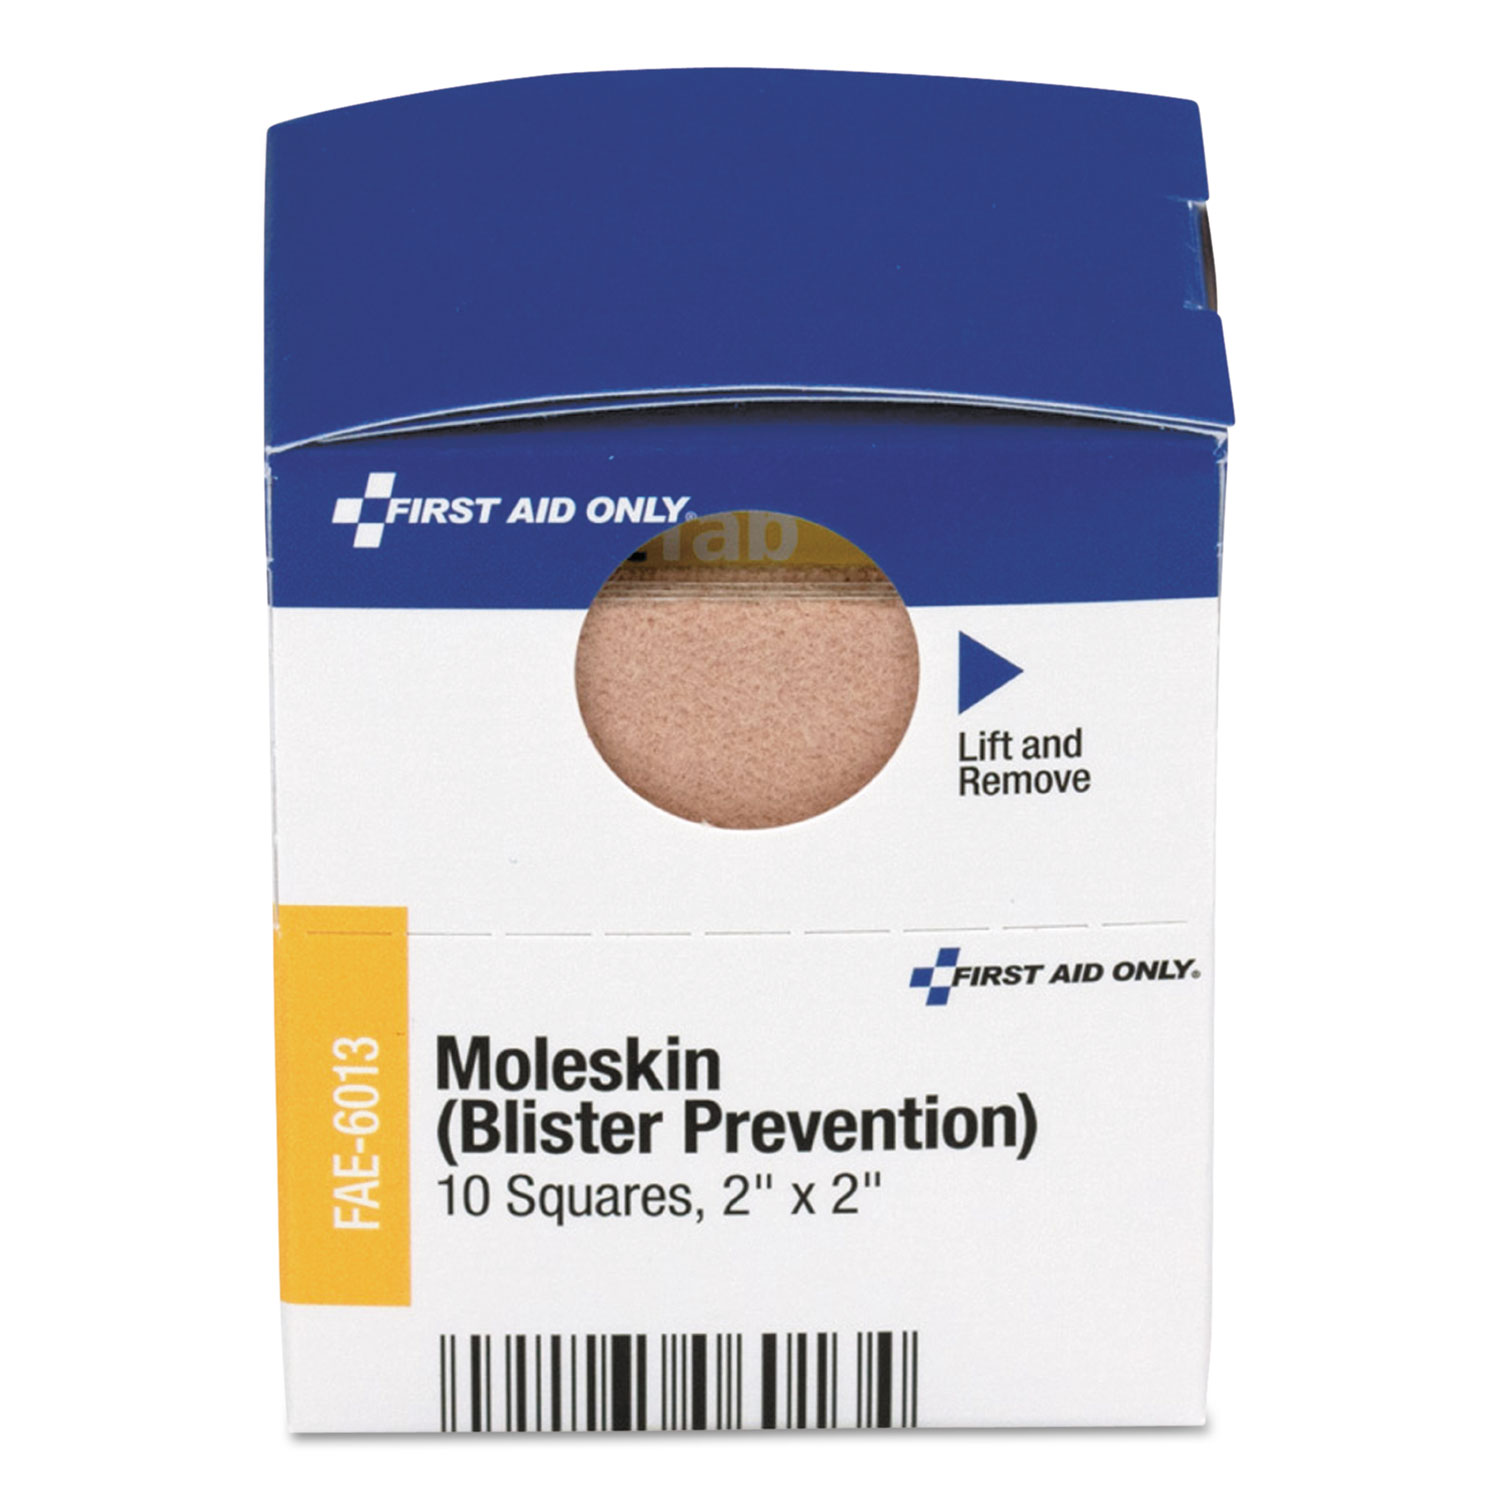 First Aid Only FAE-6013 Moleskin/Blister Protection, 2” Squares, 10/Box - image 2 of 3